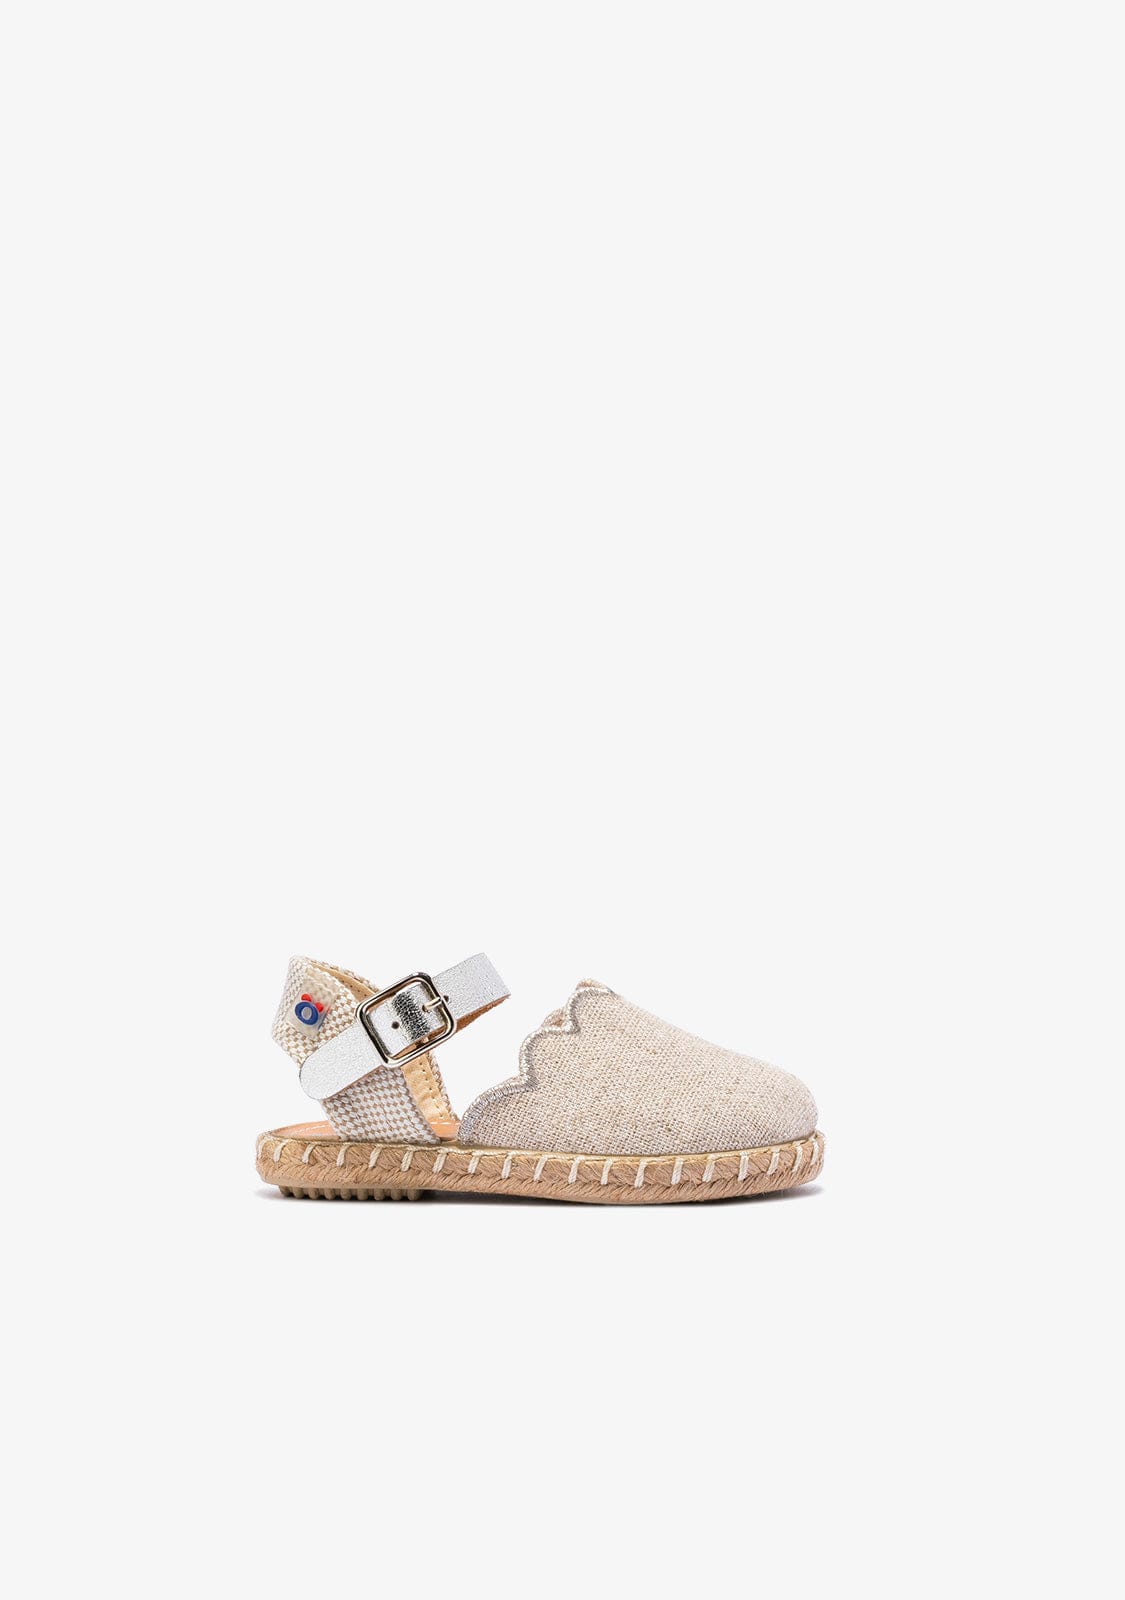 OSITO Shoes Baby's Silver Metallized Espadrilles